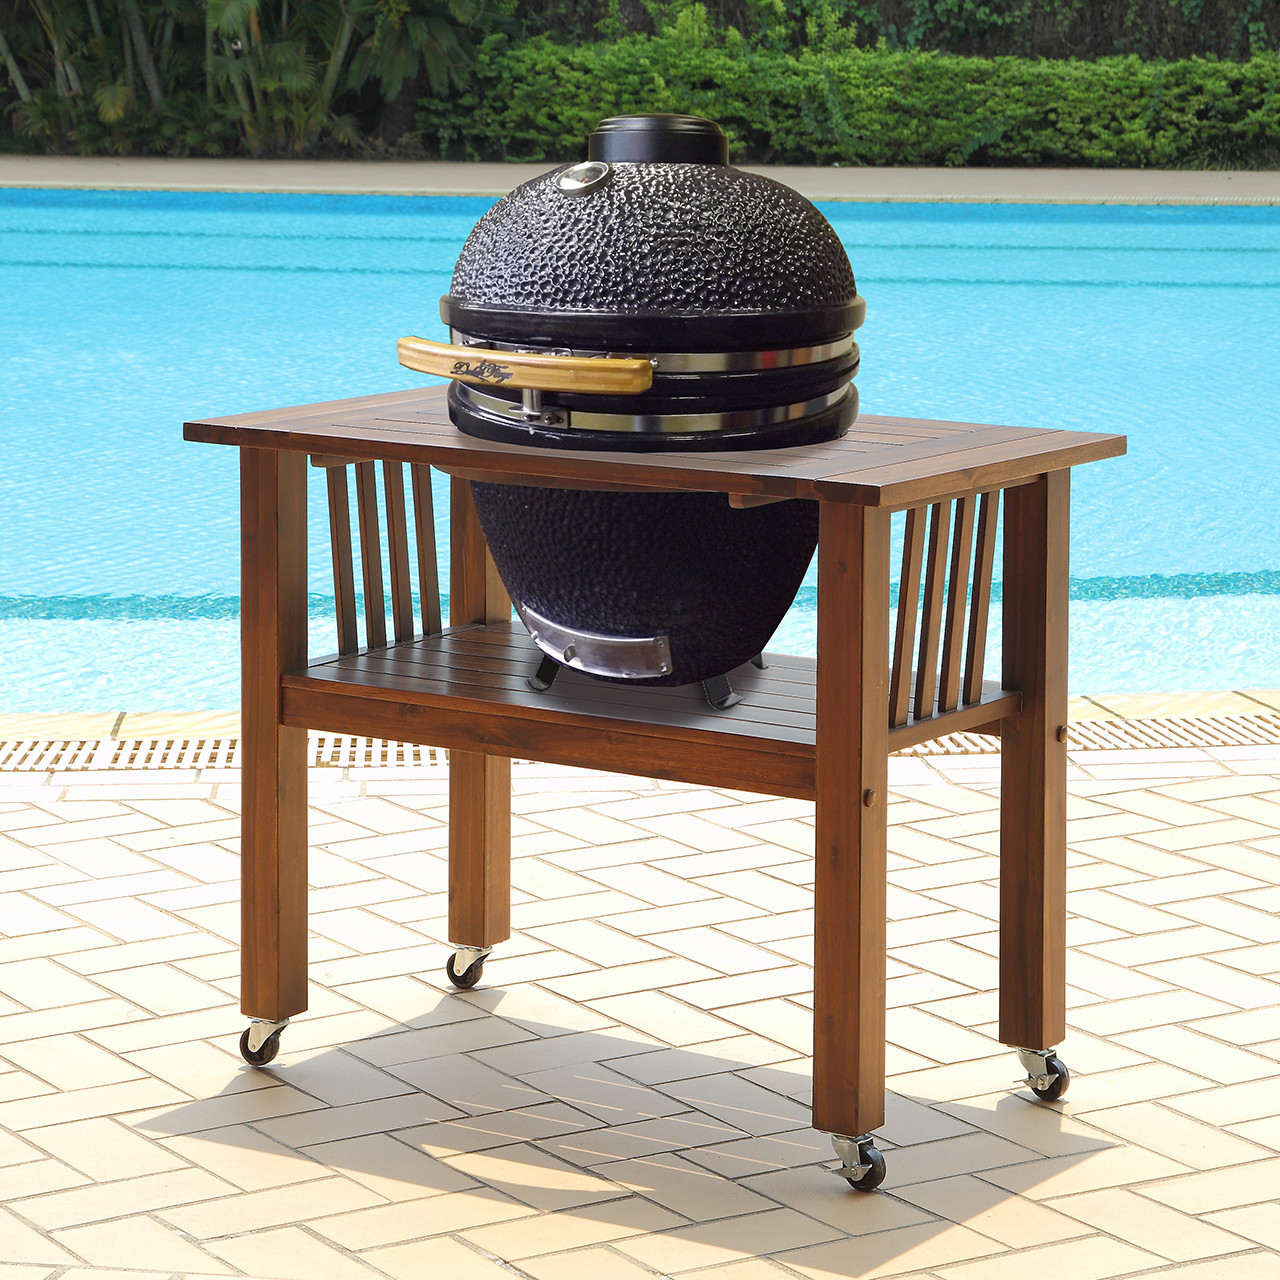 Duluth Forge 18 Inch Kamado Grill With Table - Brown Spice - Factory Buys  Direct